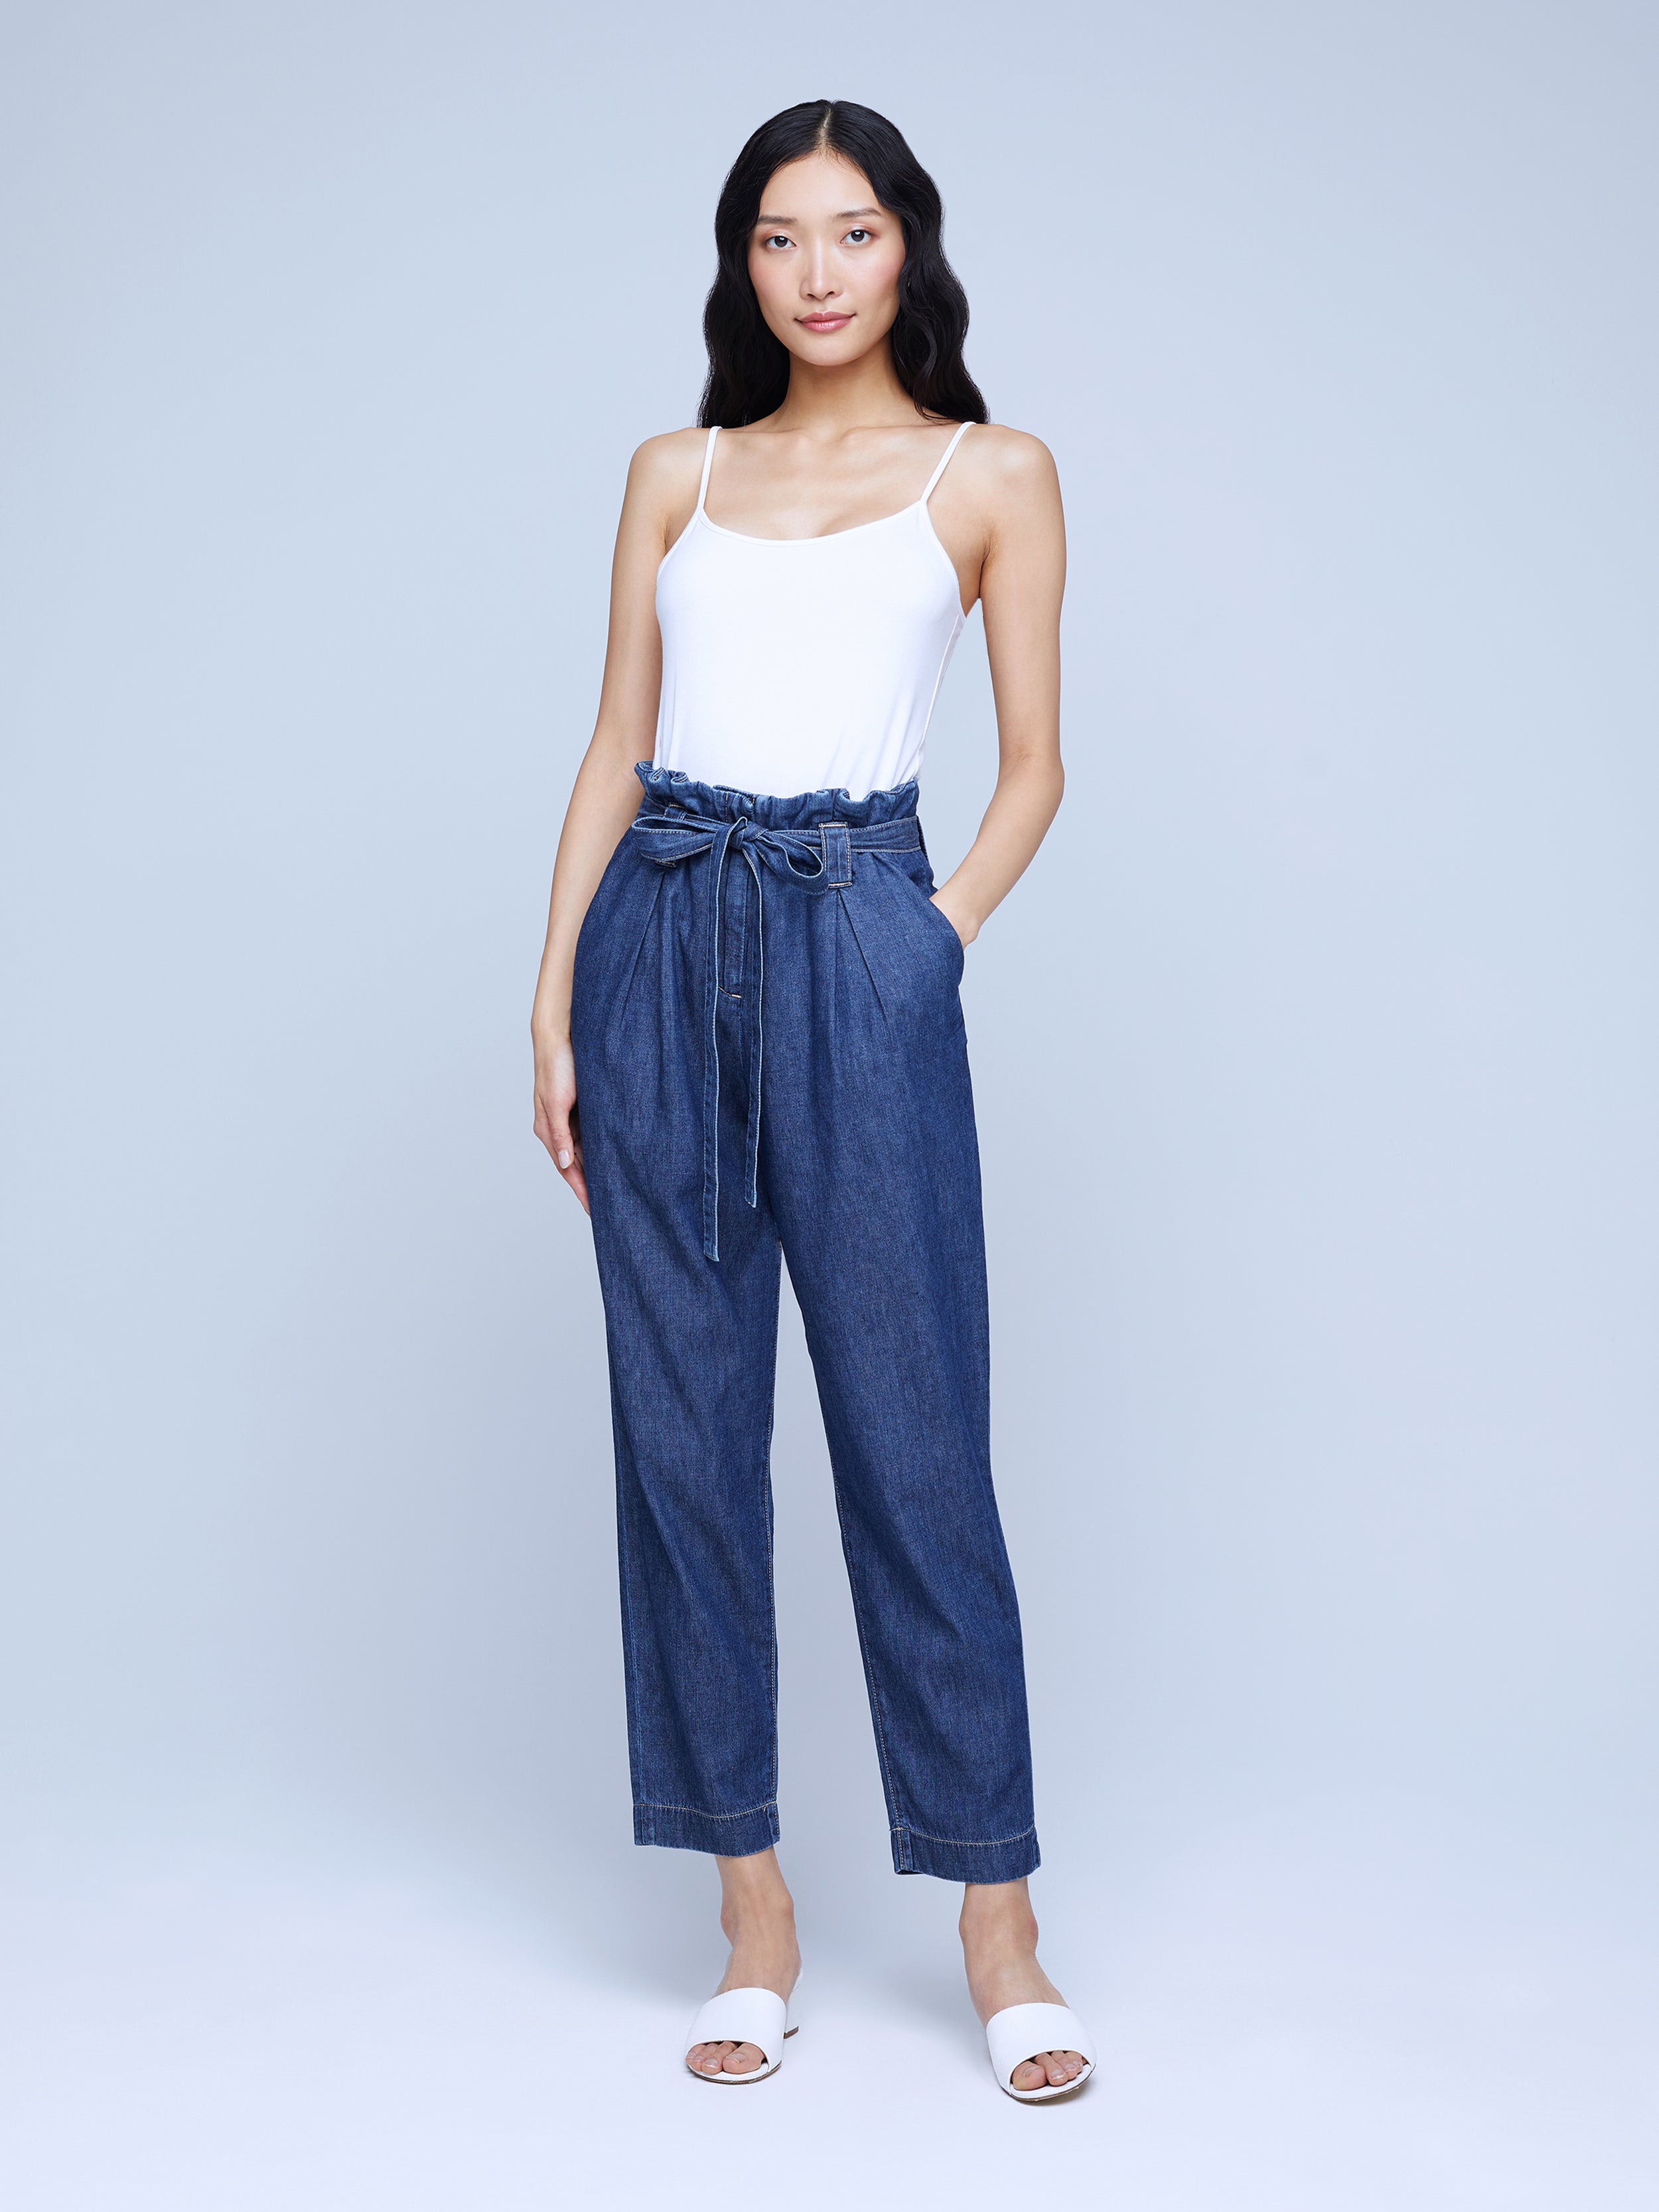 Buy Campus Sutra Women Casual Paper Bag Trousers(SS20_CSWSSLW189_S) Light  Blue at Amazon.in